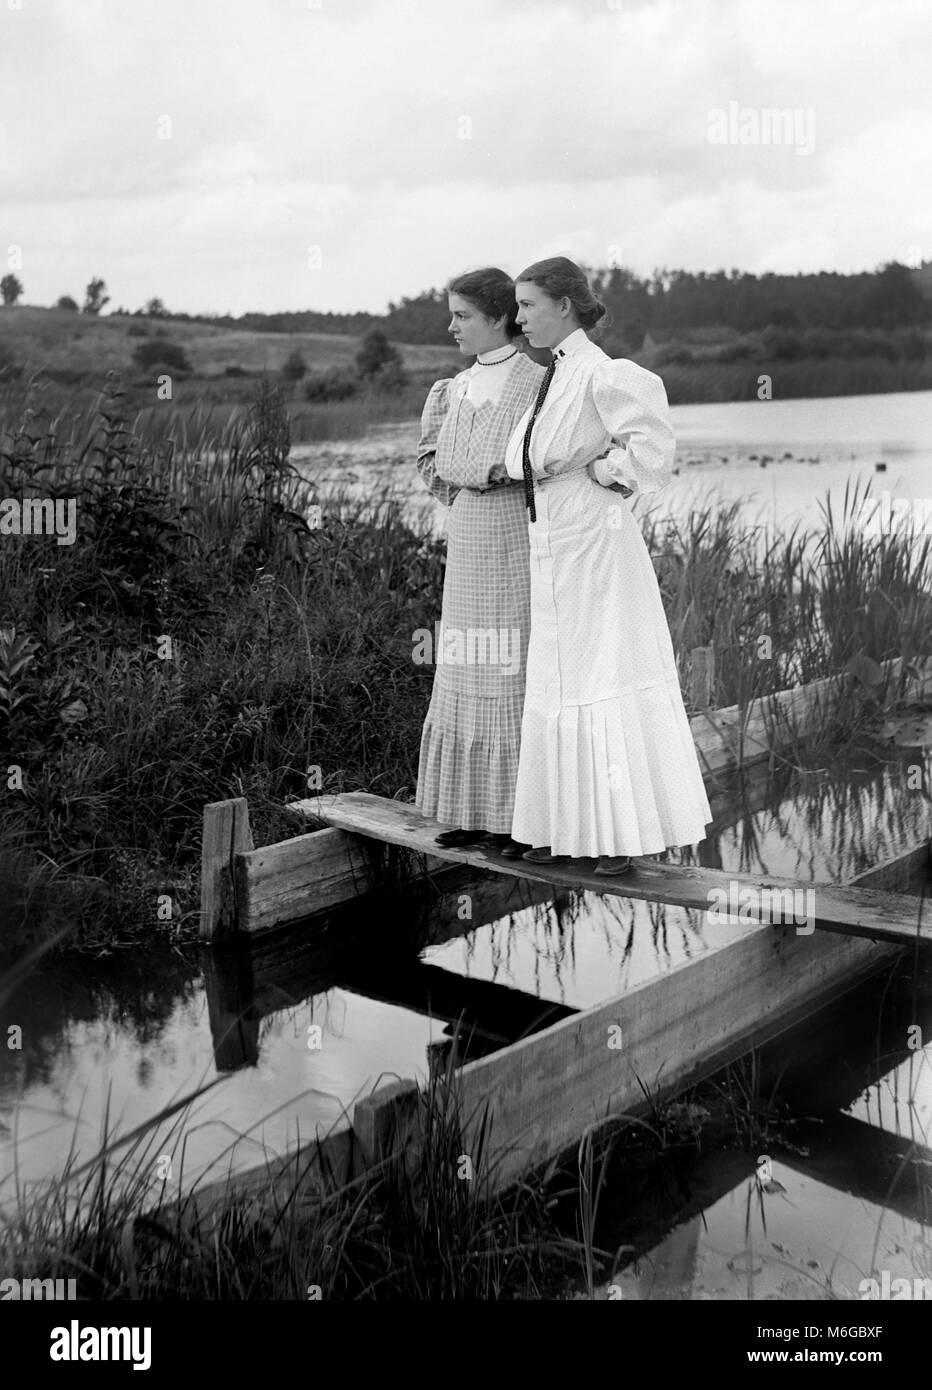 Sisters strike a pose on boards positioned over a waterway, ca. 1900. Stock Photo